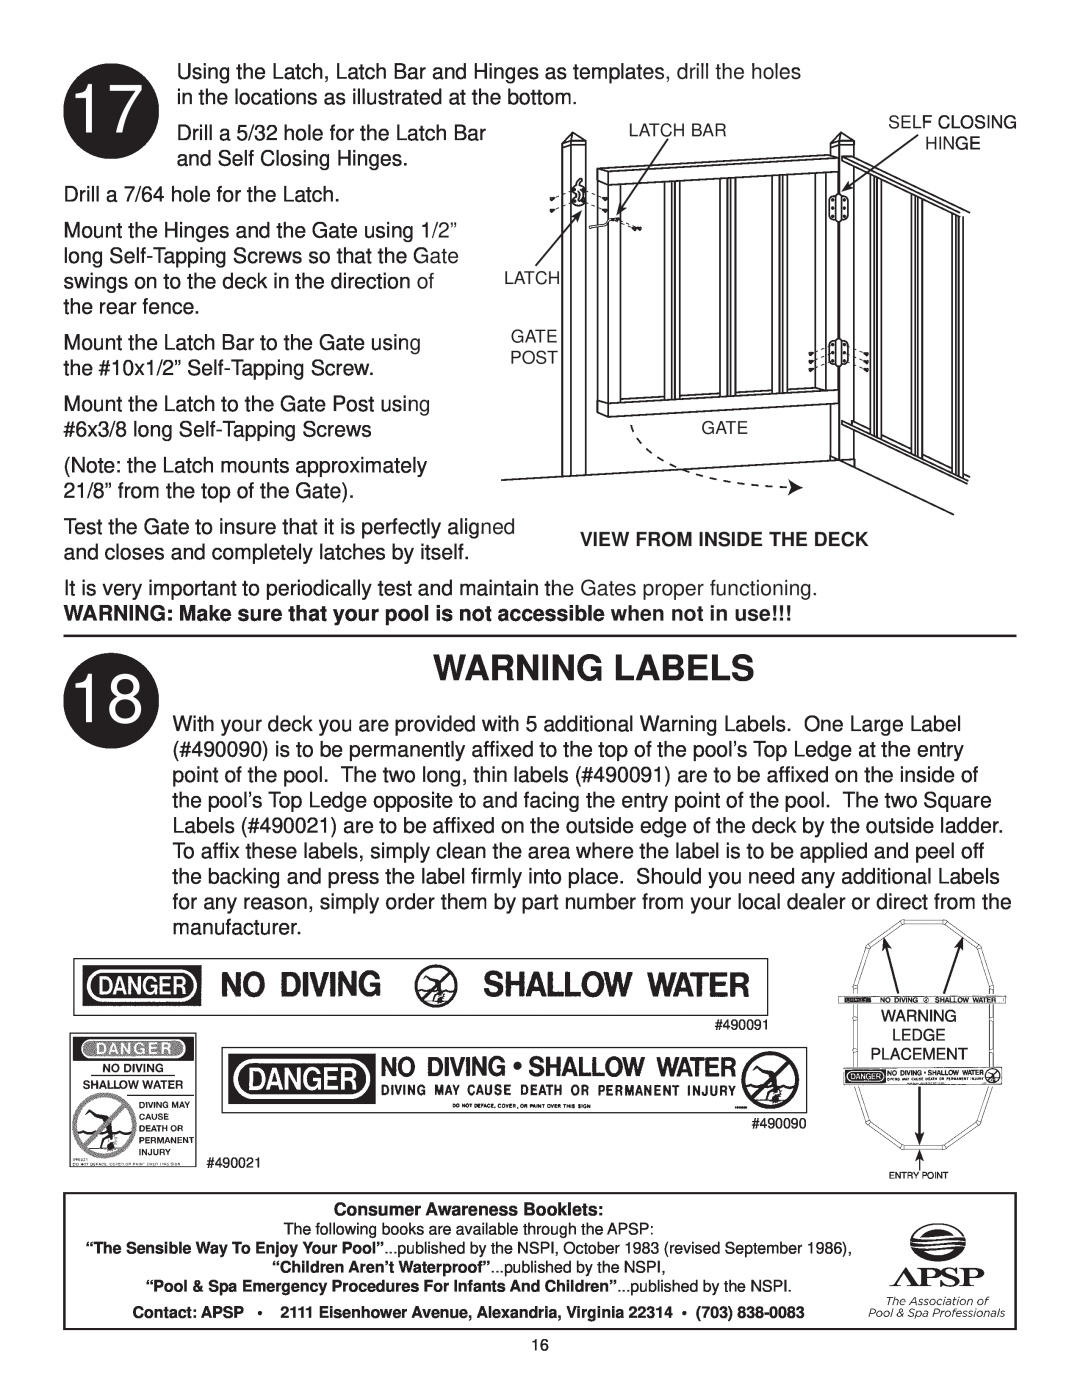 Swim'n Play side deck manual WARNING Make sure that your pool is not accessible when not in use, Warning Labels 